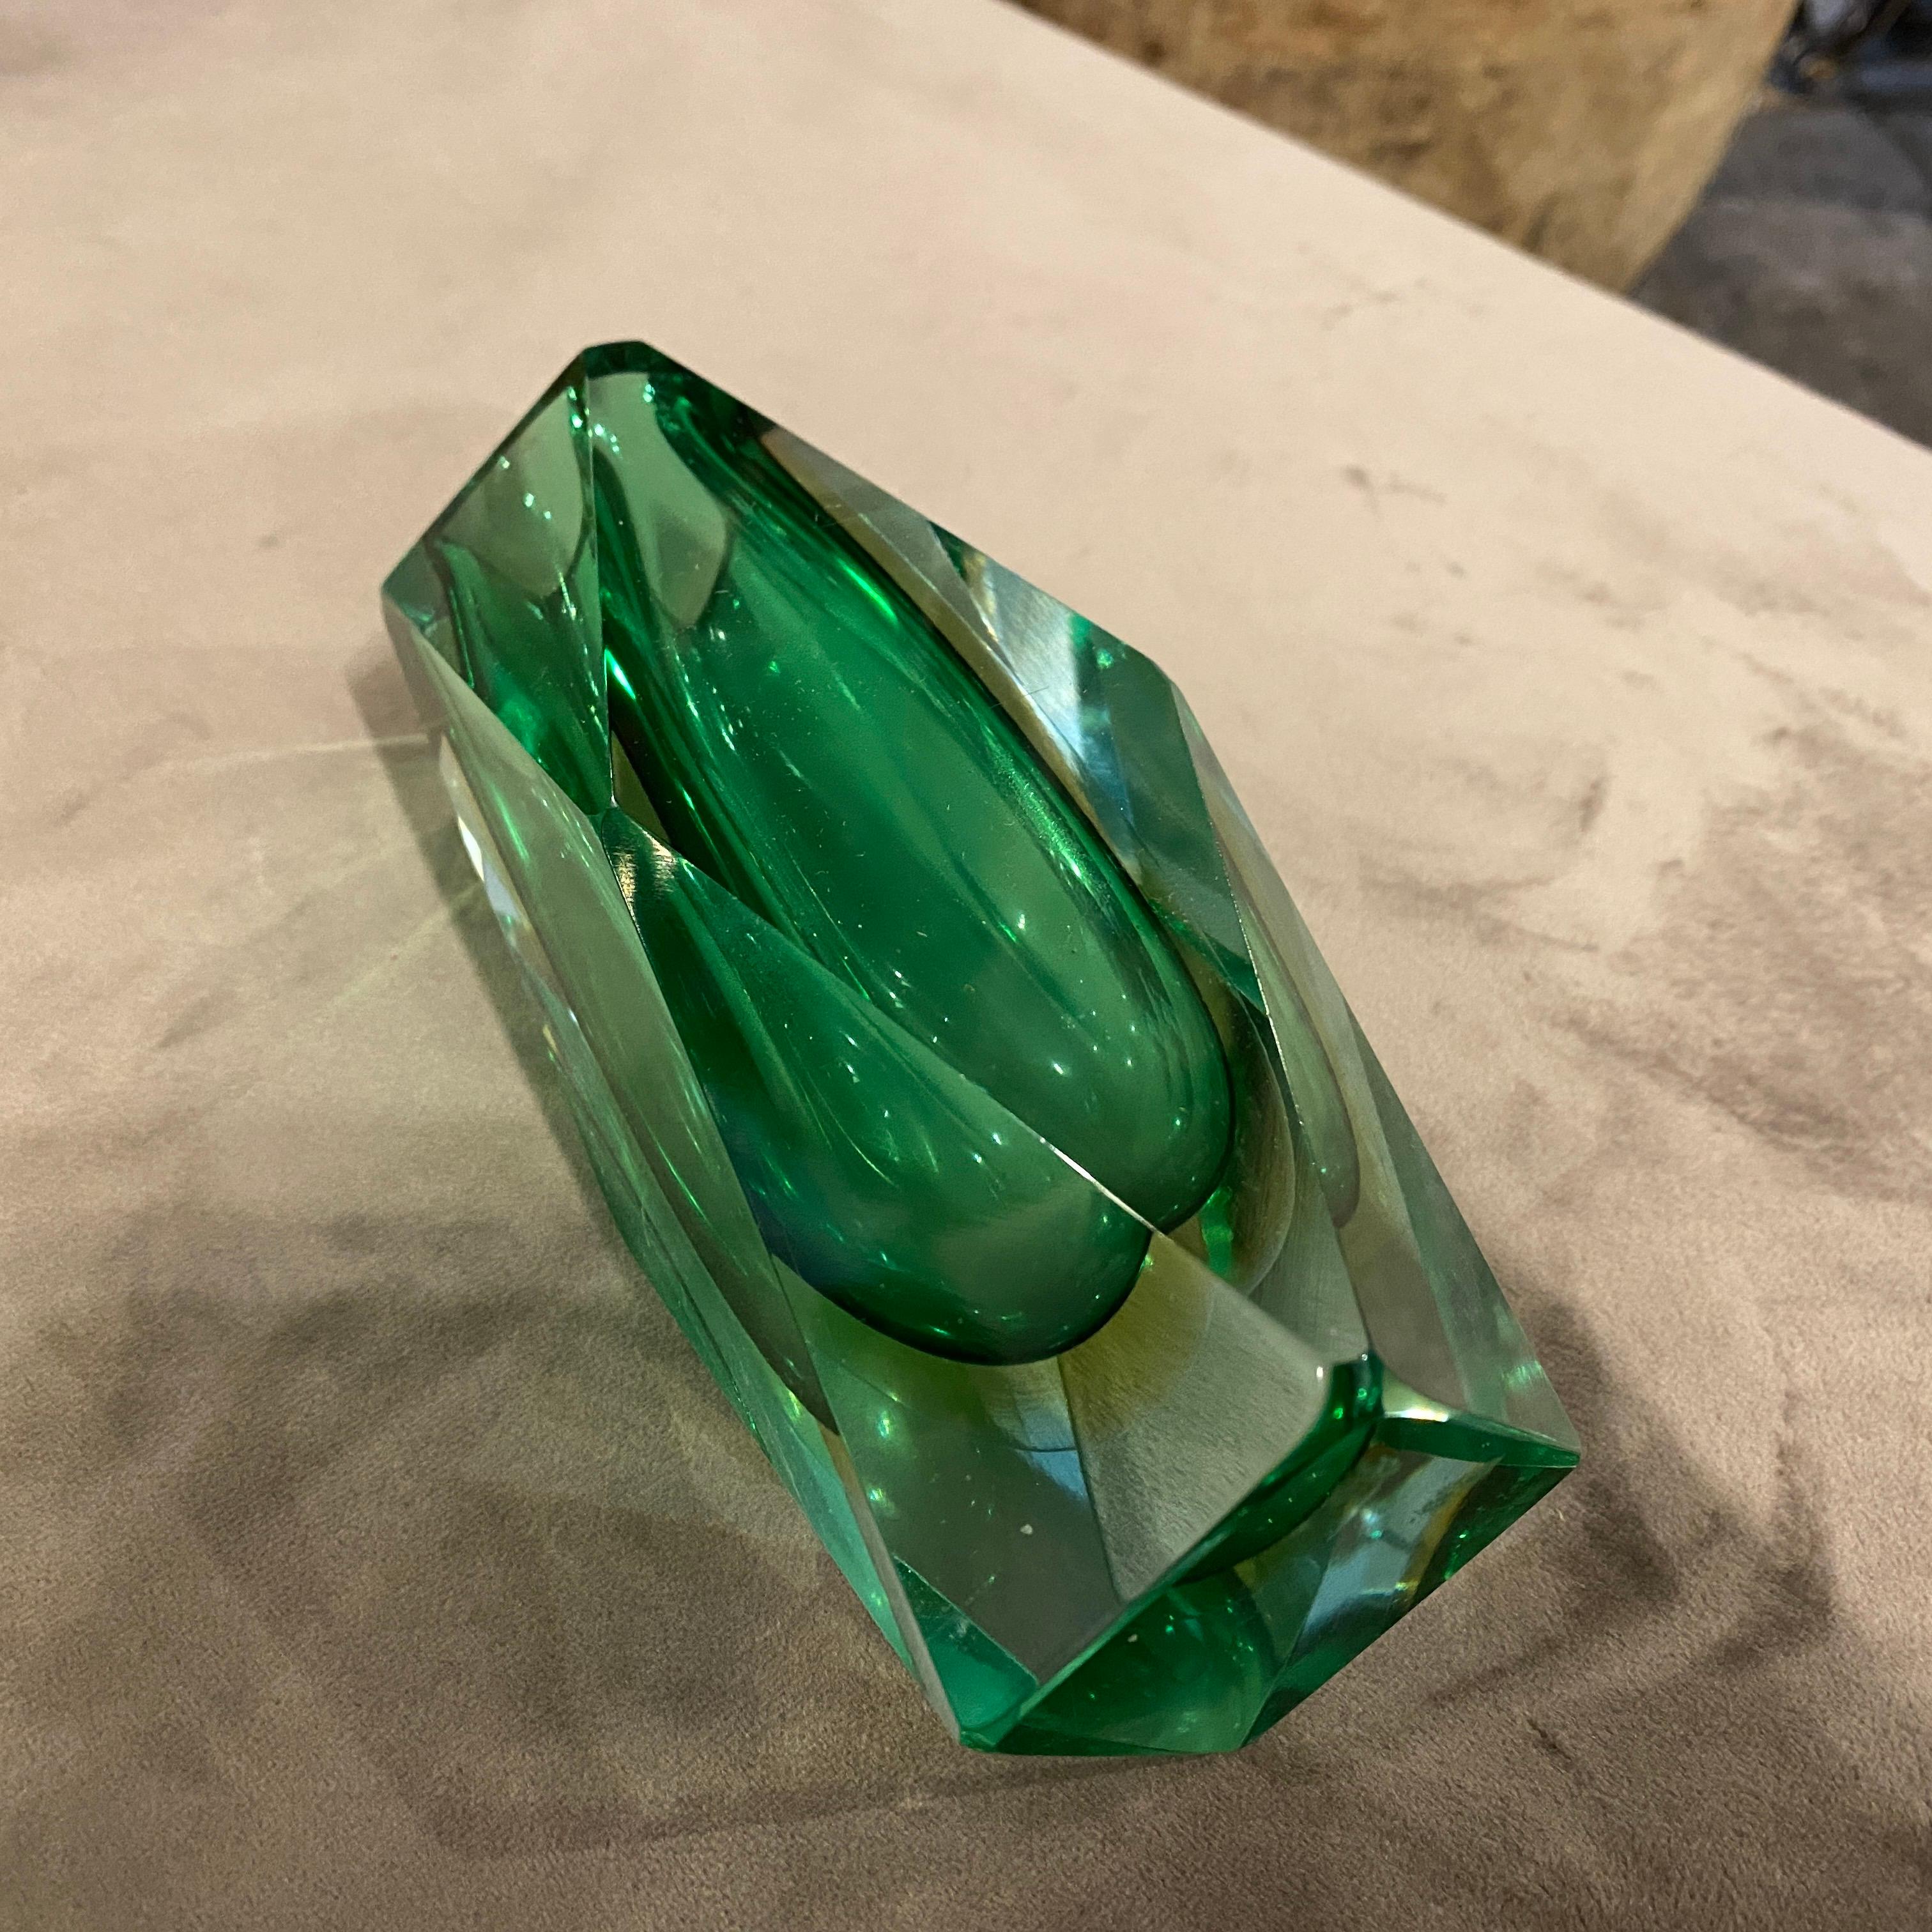 1970s Mid-Century Modern Green Faceted Murano Glass Vase by Seguso For Sale 3